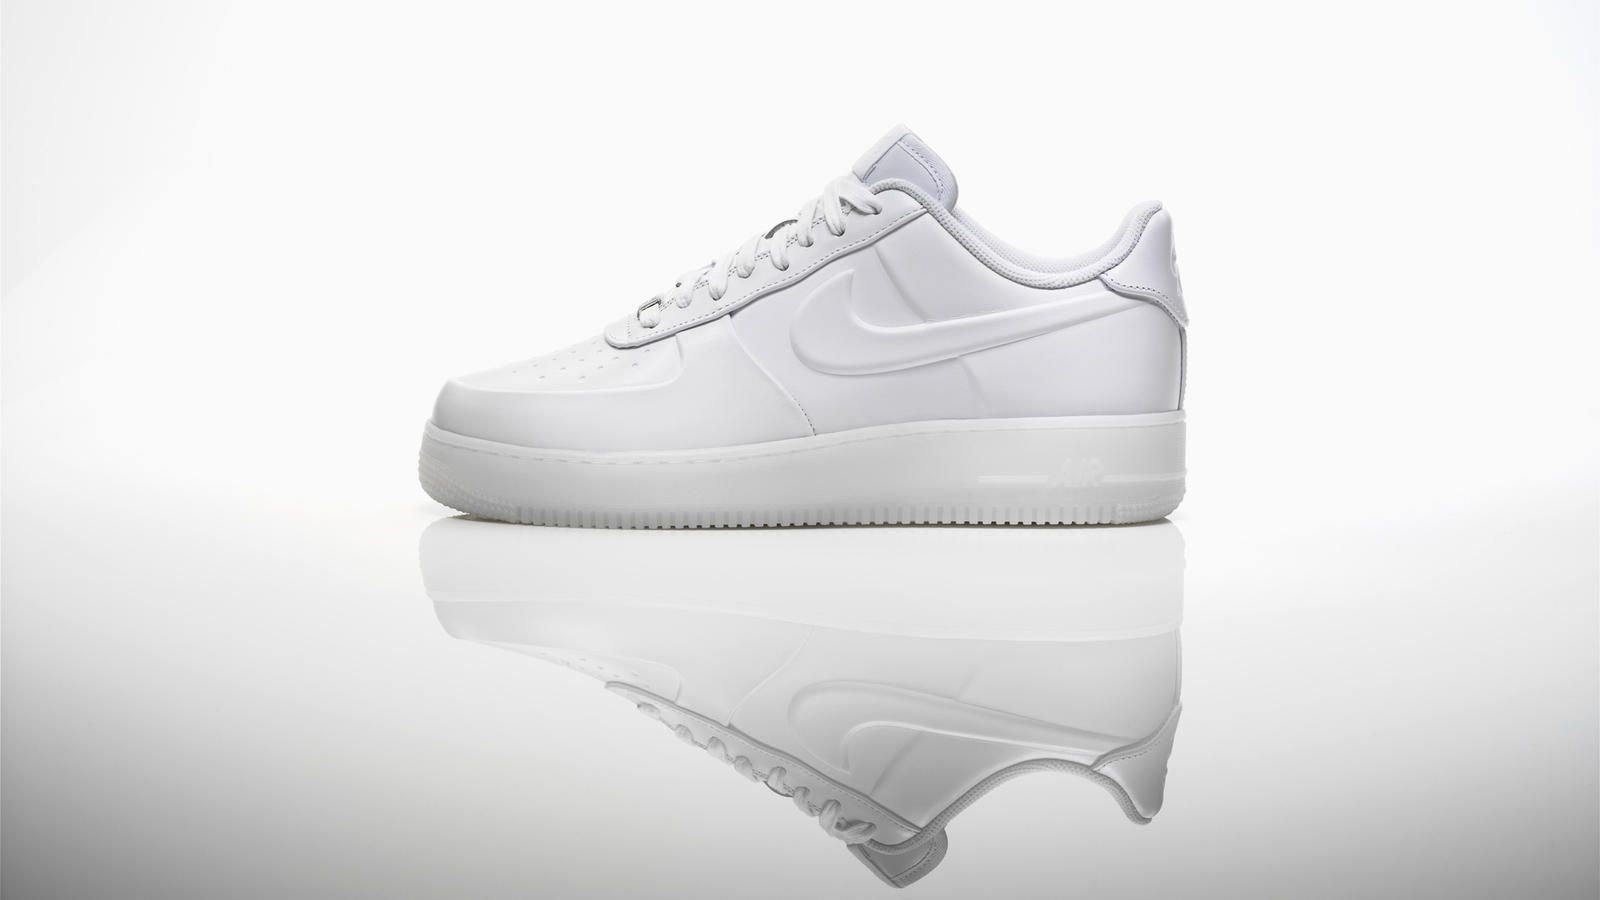 Free download Fall 2011 Nike Air Force One Nike News [1600x900] for your Desktop, Mobile & Tablet